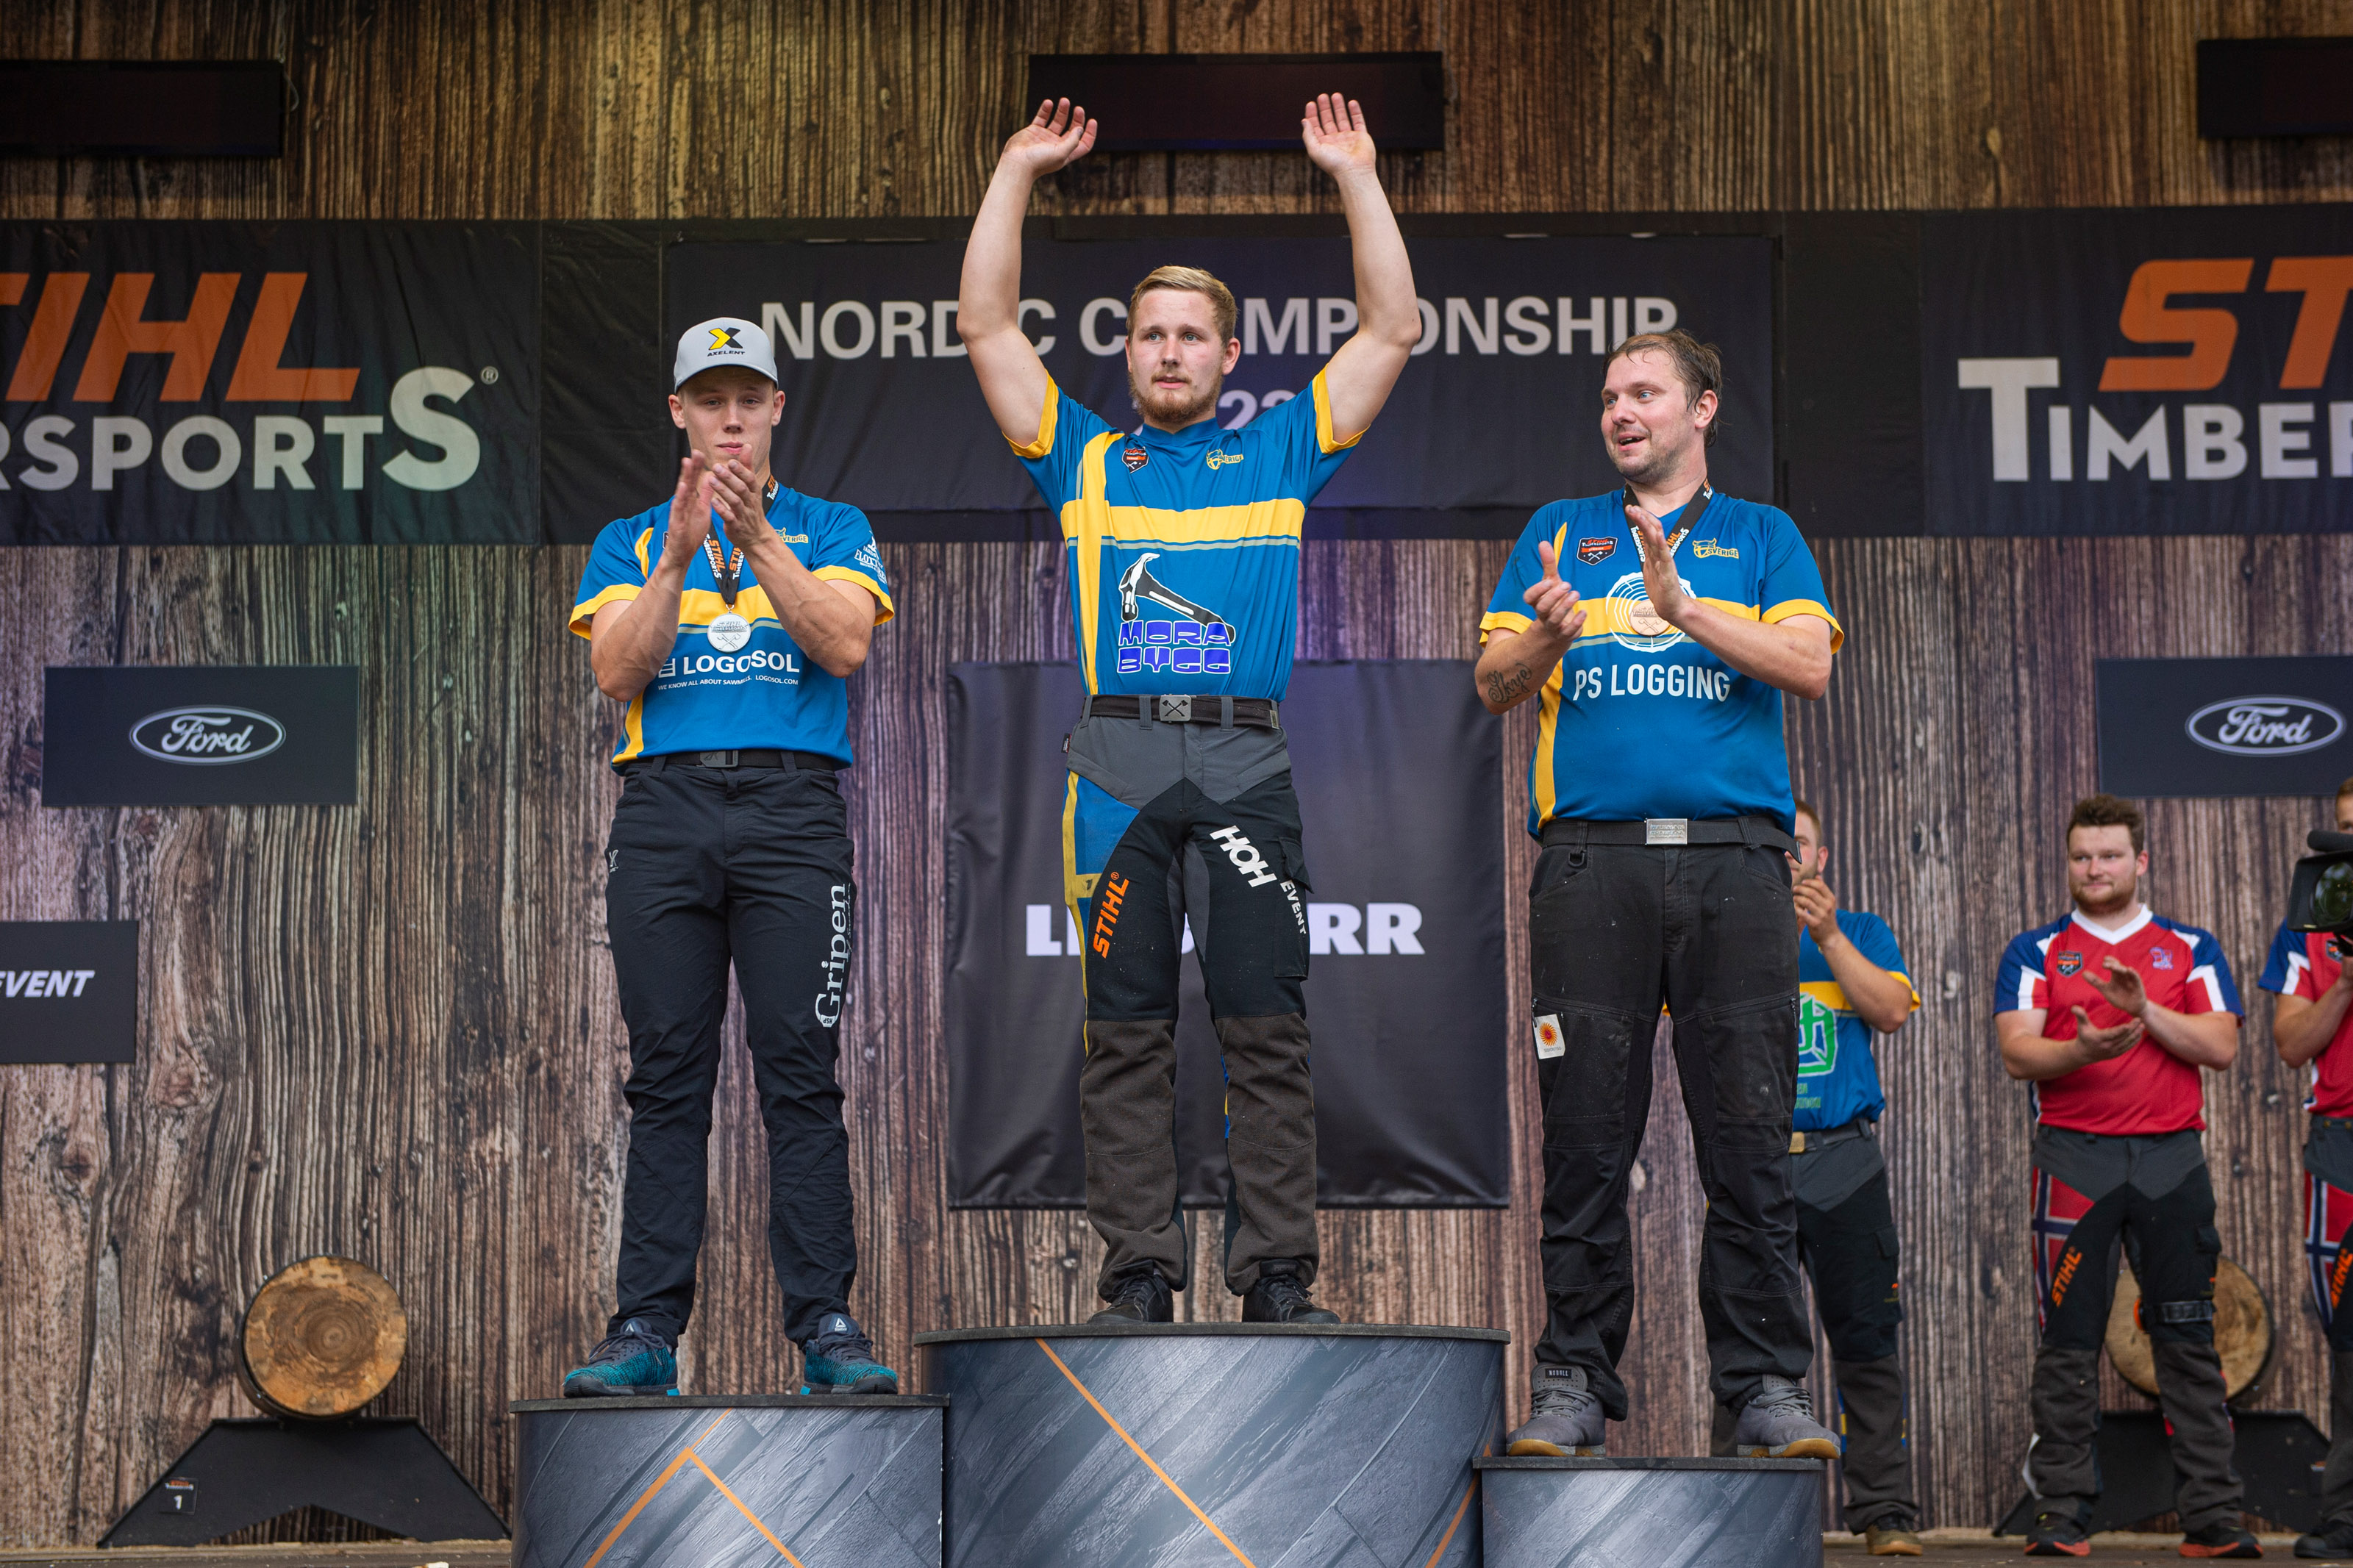 Emil Hansson took home the victory after an impressive performance at the Nordic Championship 2022. Ferry Svan and Pontus Skye take silver and bronze.